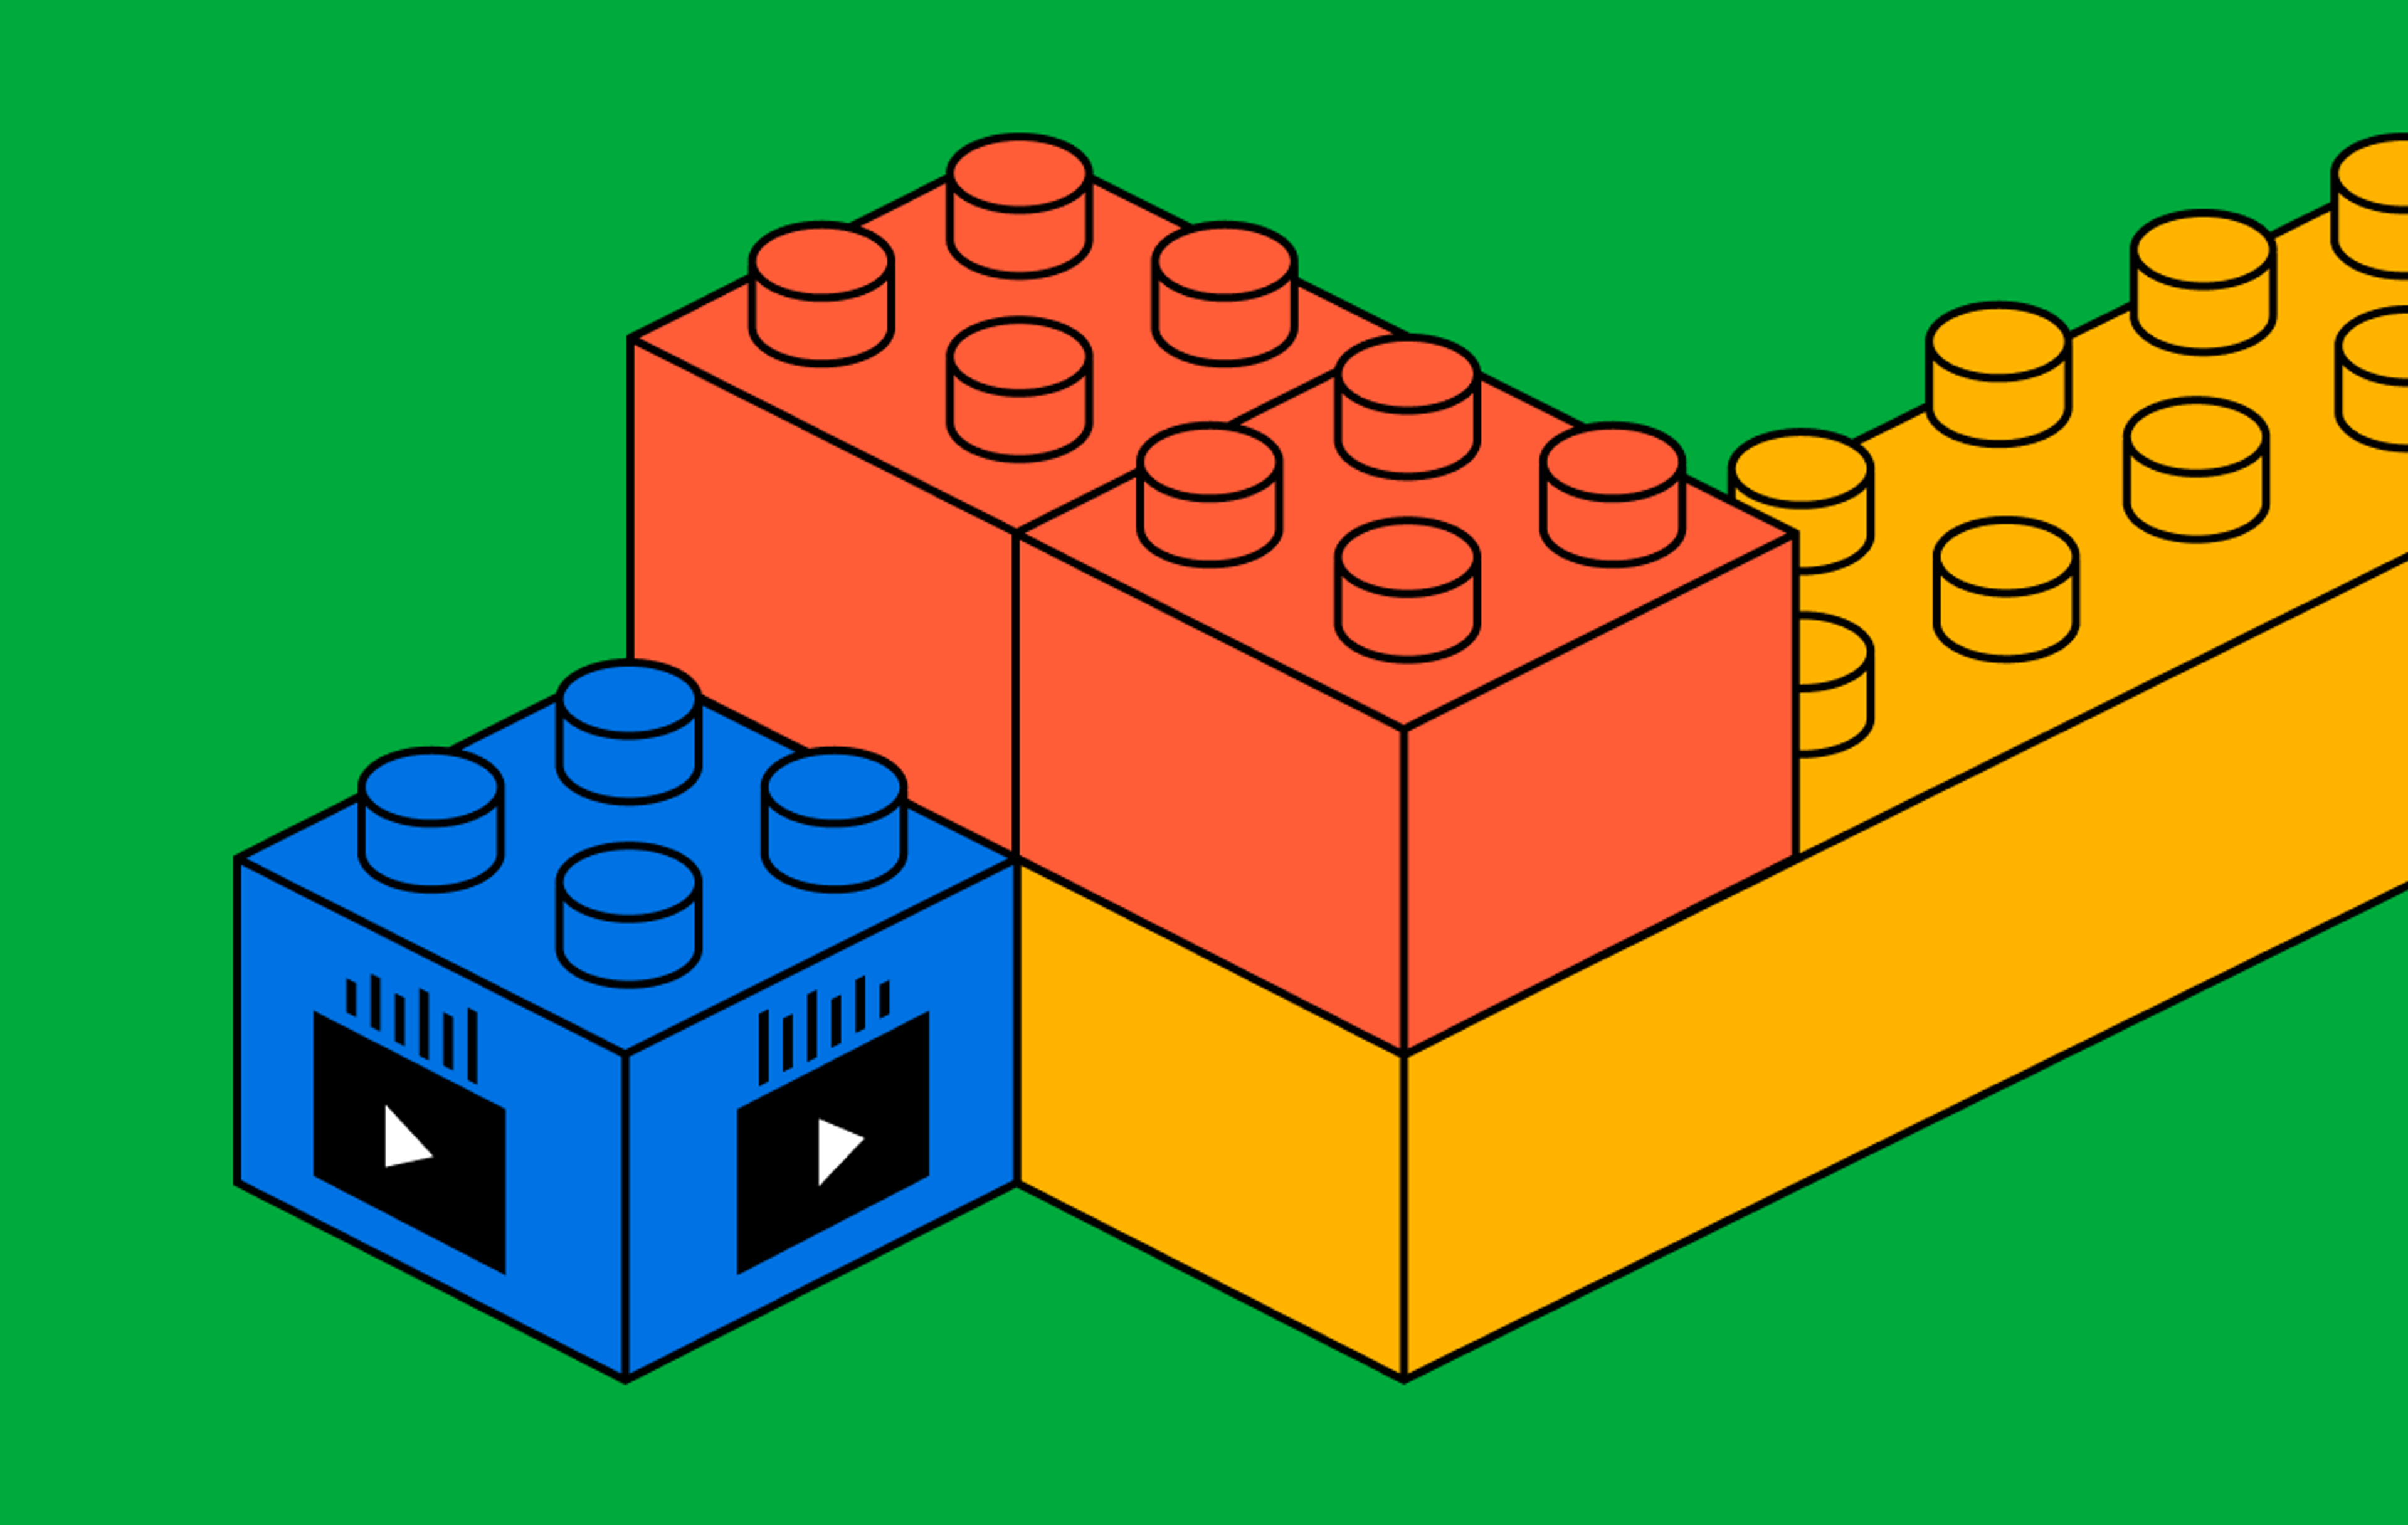 Building blocks in the style of LEGO stacked together. The blue building block has a player symbol with a graph above it. 